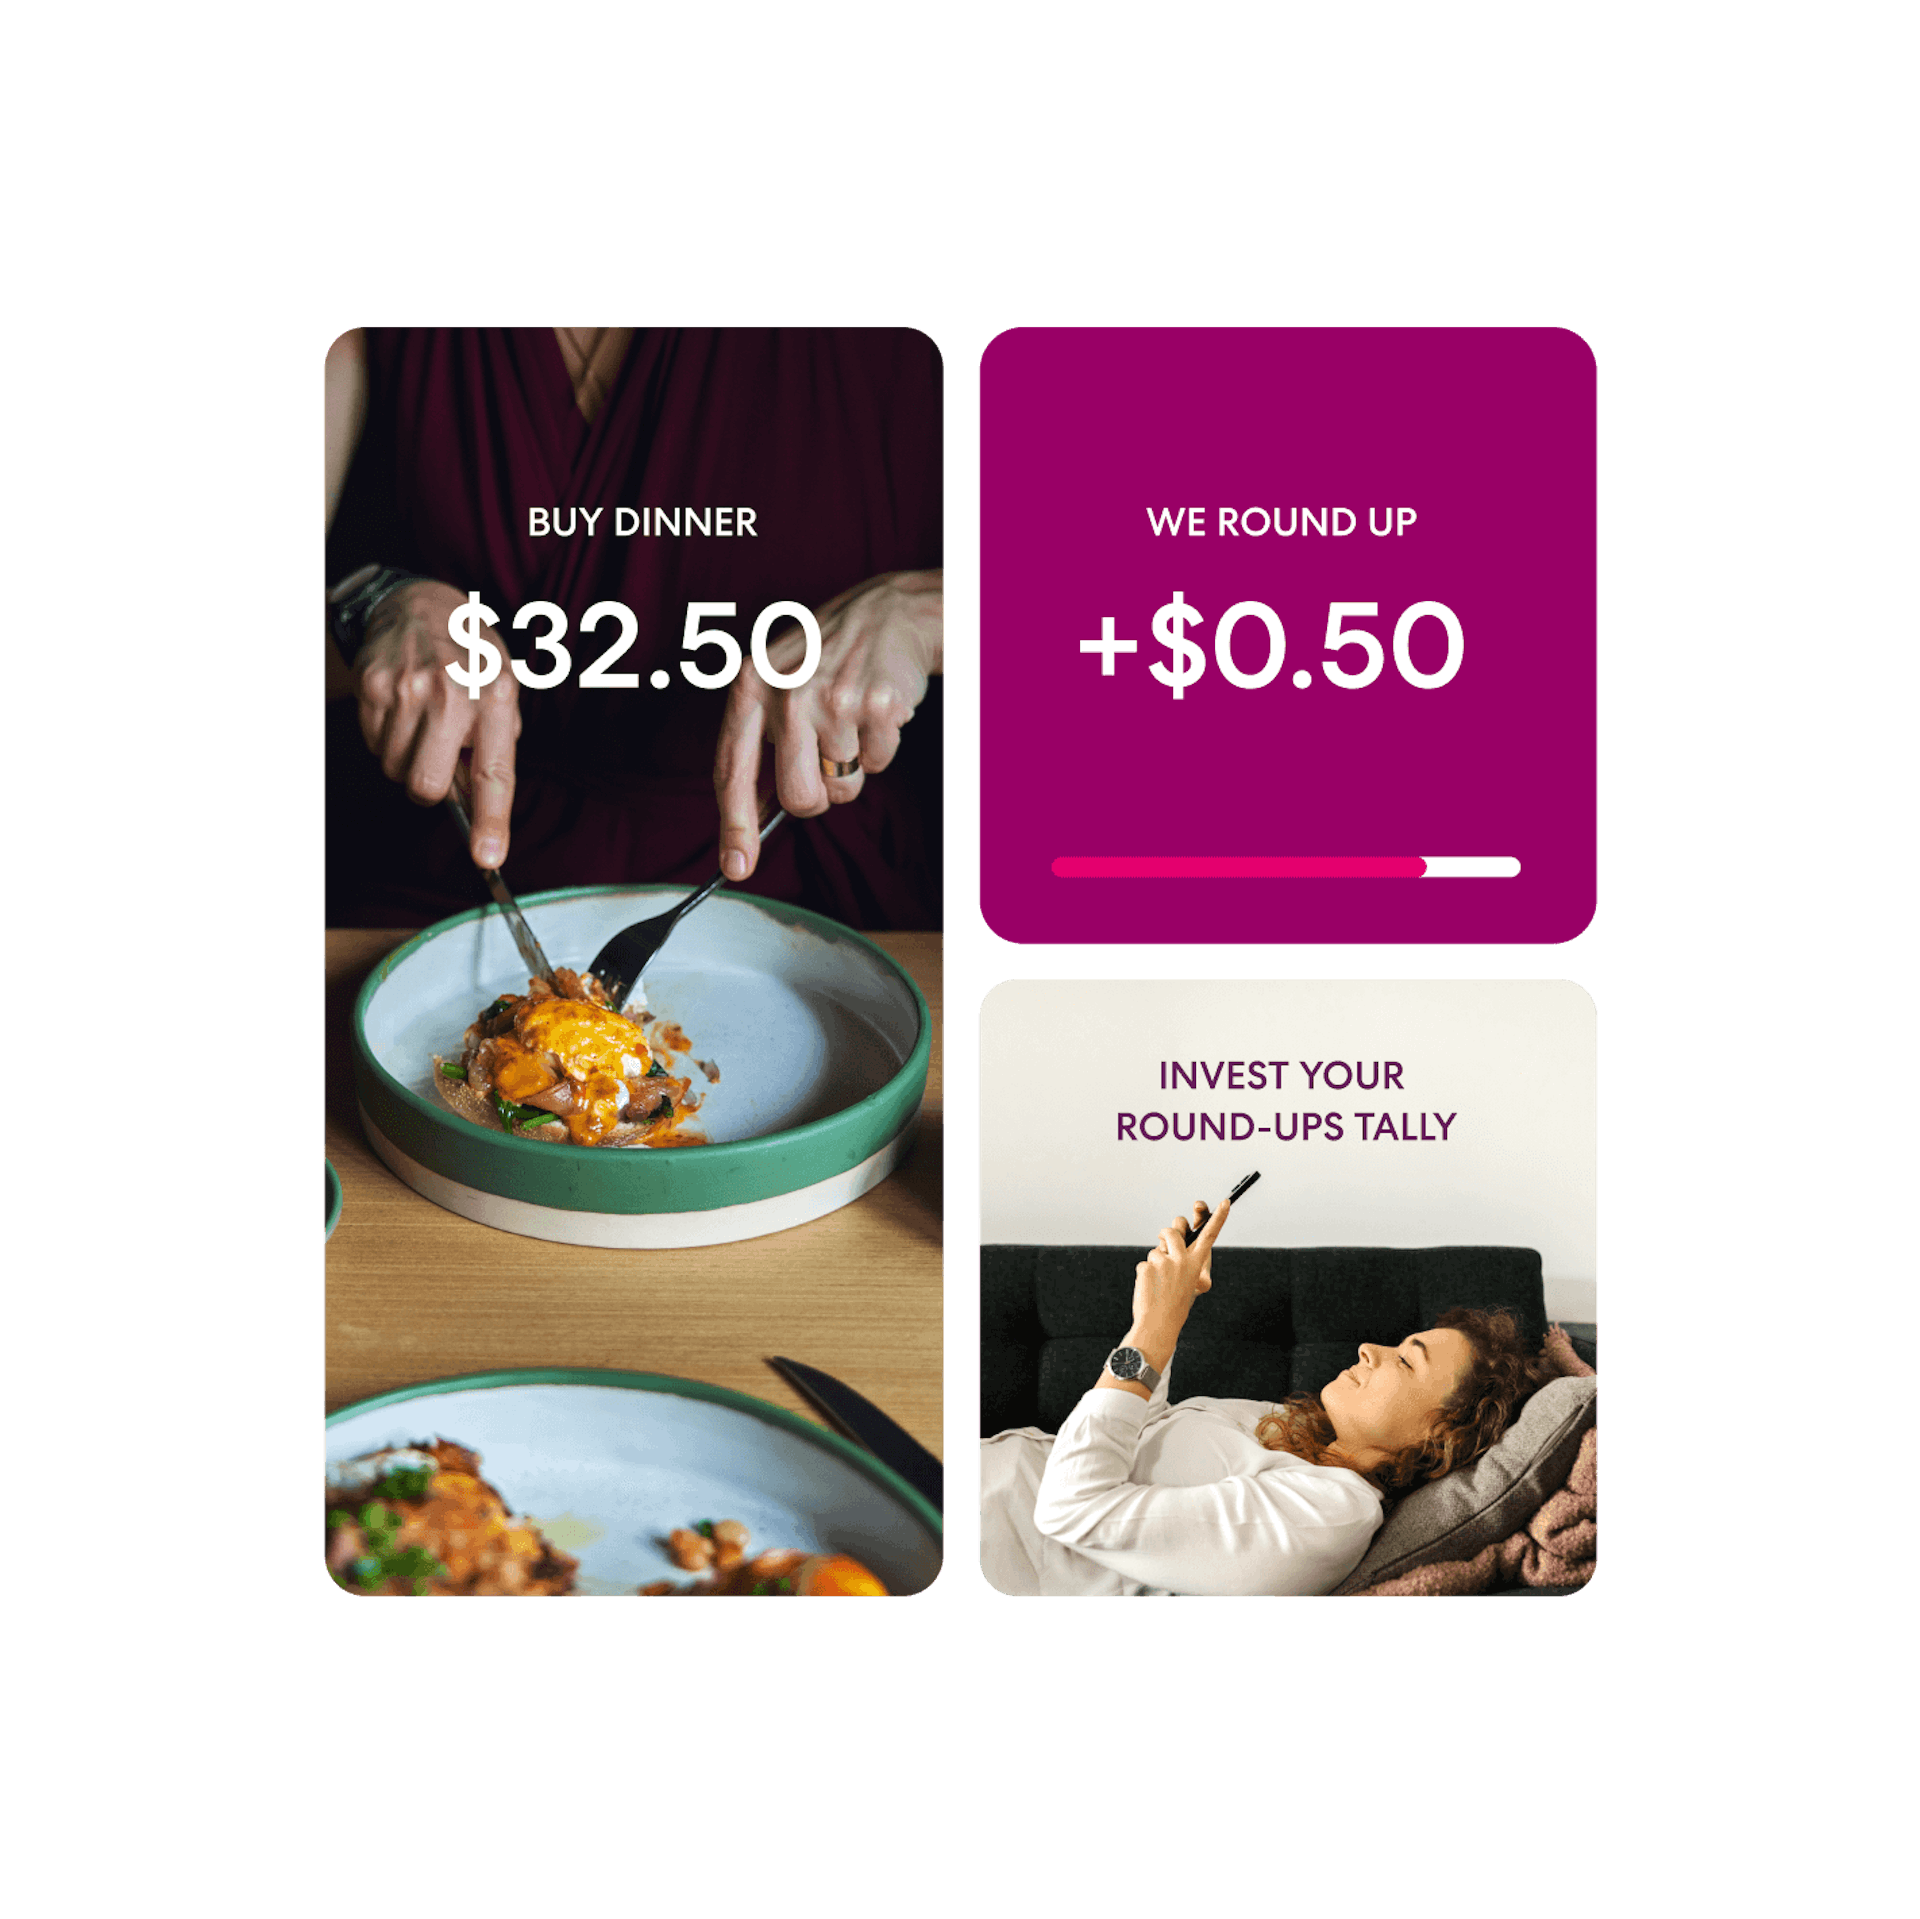 The words 'buy dinner, $32.50' are superimposed over a person cutting into a meal on a plate with knife and fork. This is followed by the words 'we round up, +$0.50' and a progress bar about 80% full. Lastly, the words 'invest your round-ups tally' are positioned above a woman lying back on a couch and holding her phone above her head.
